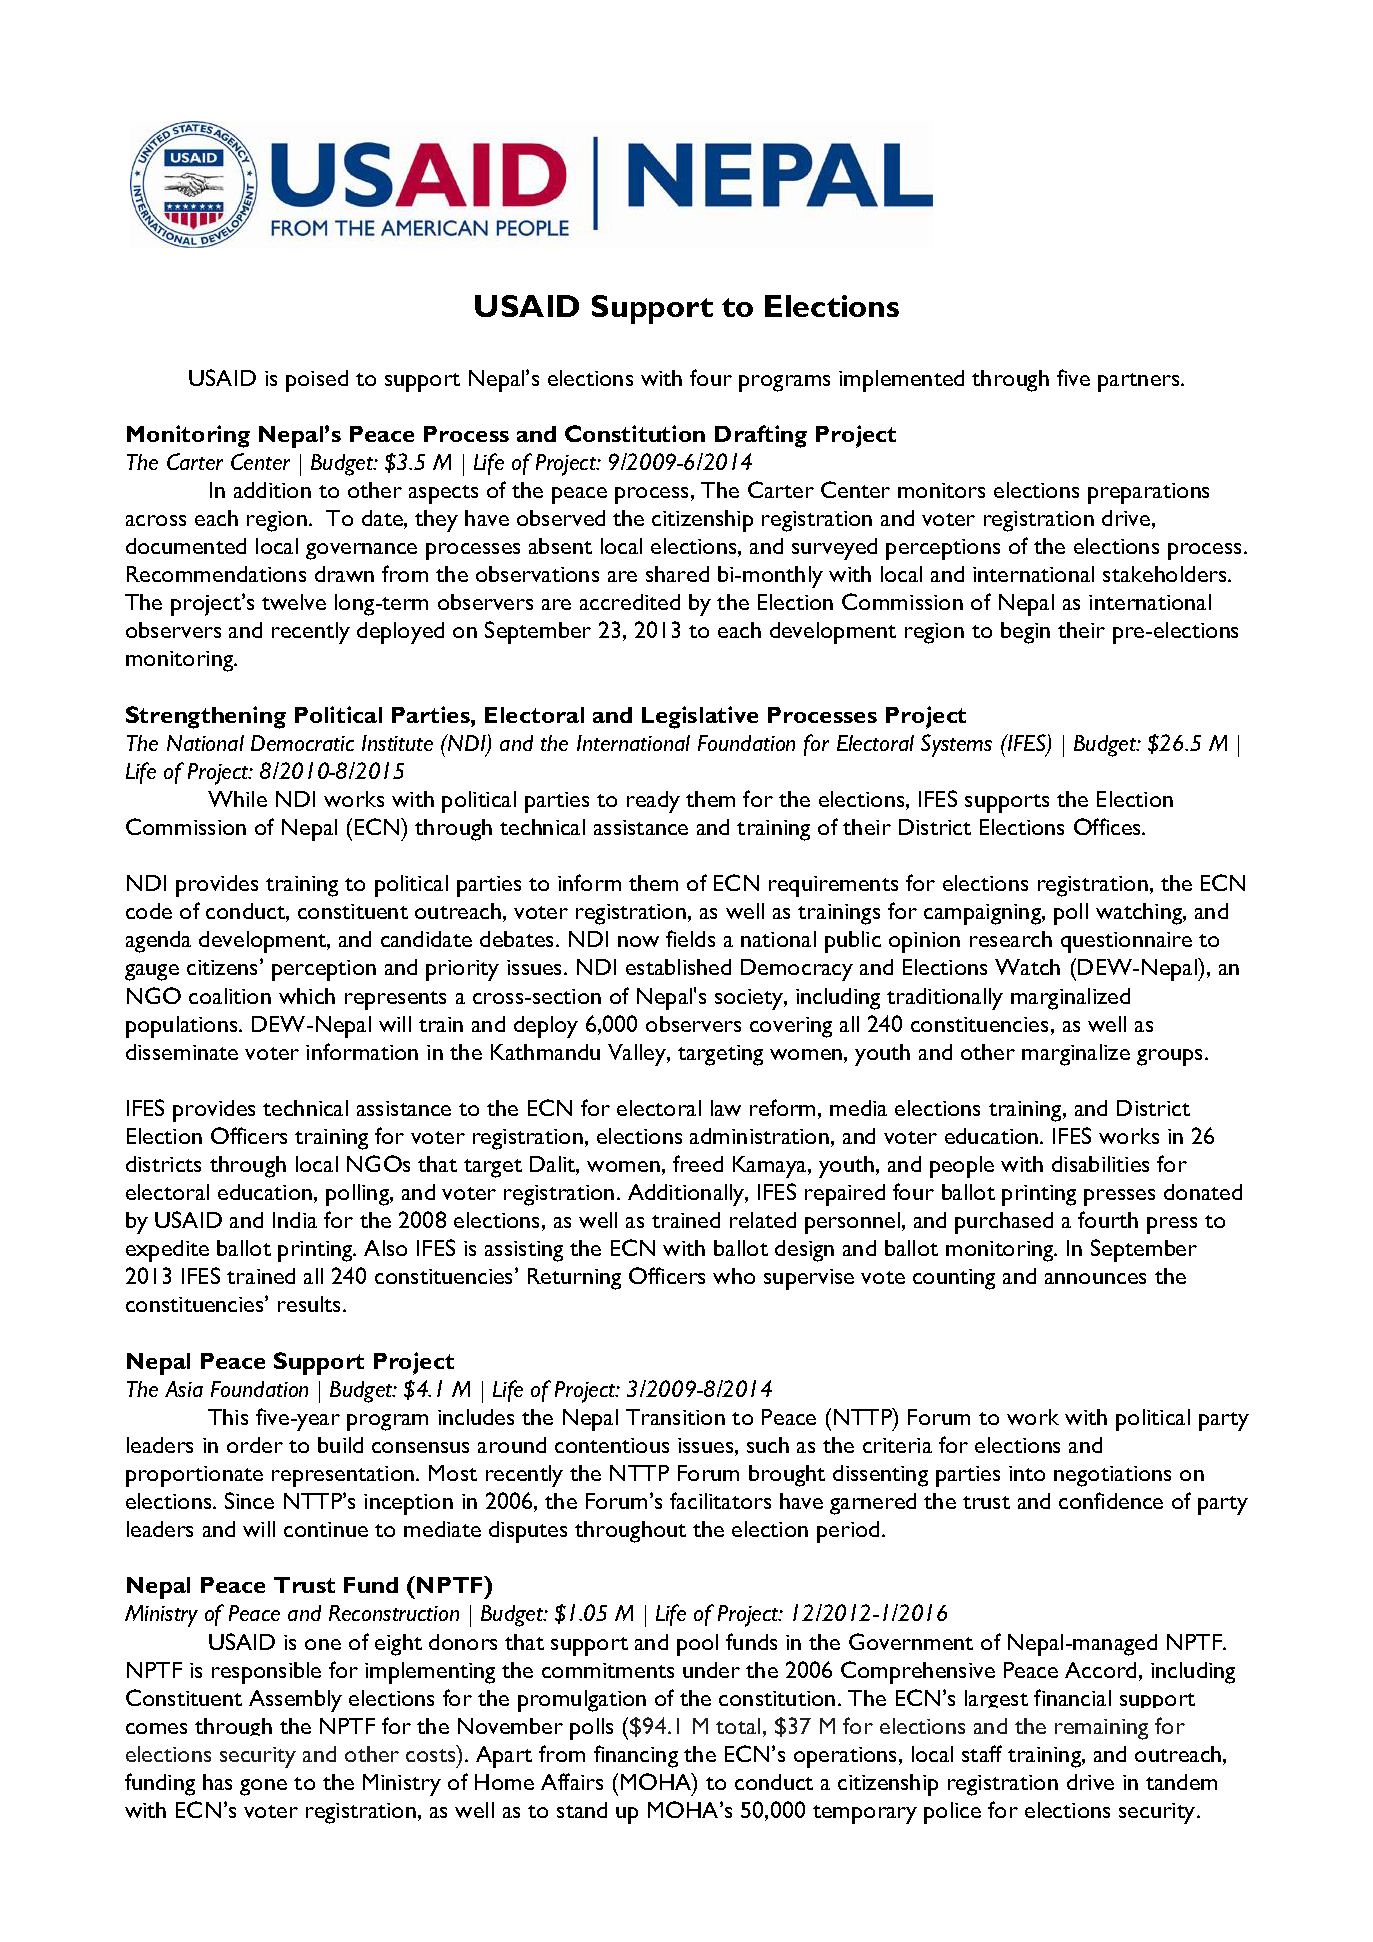 USAID Support Nepal's Elections